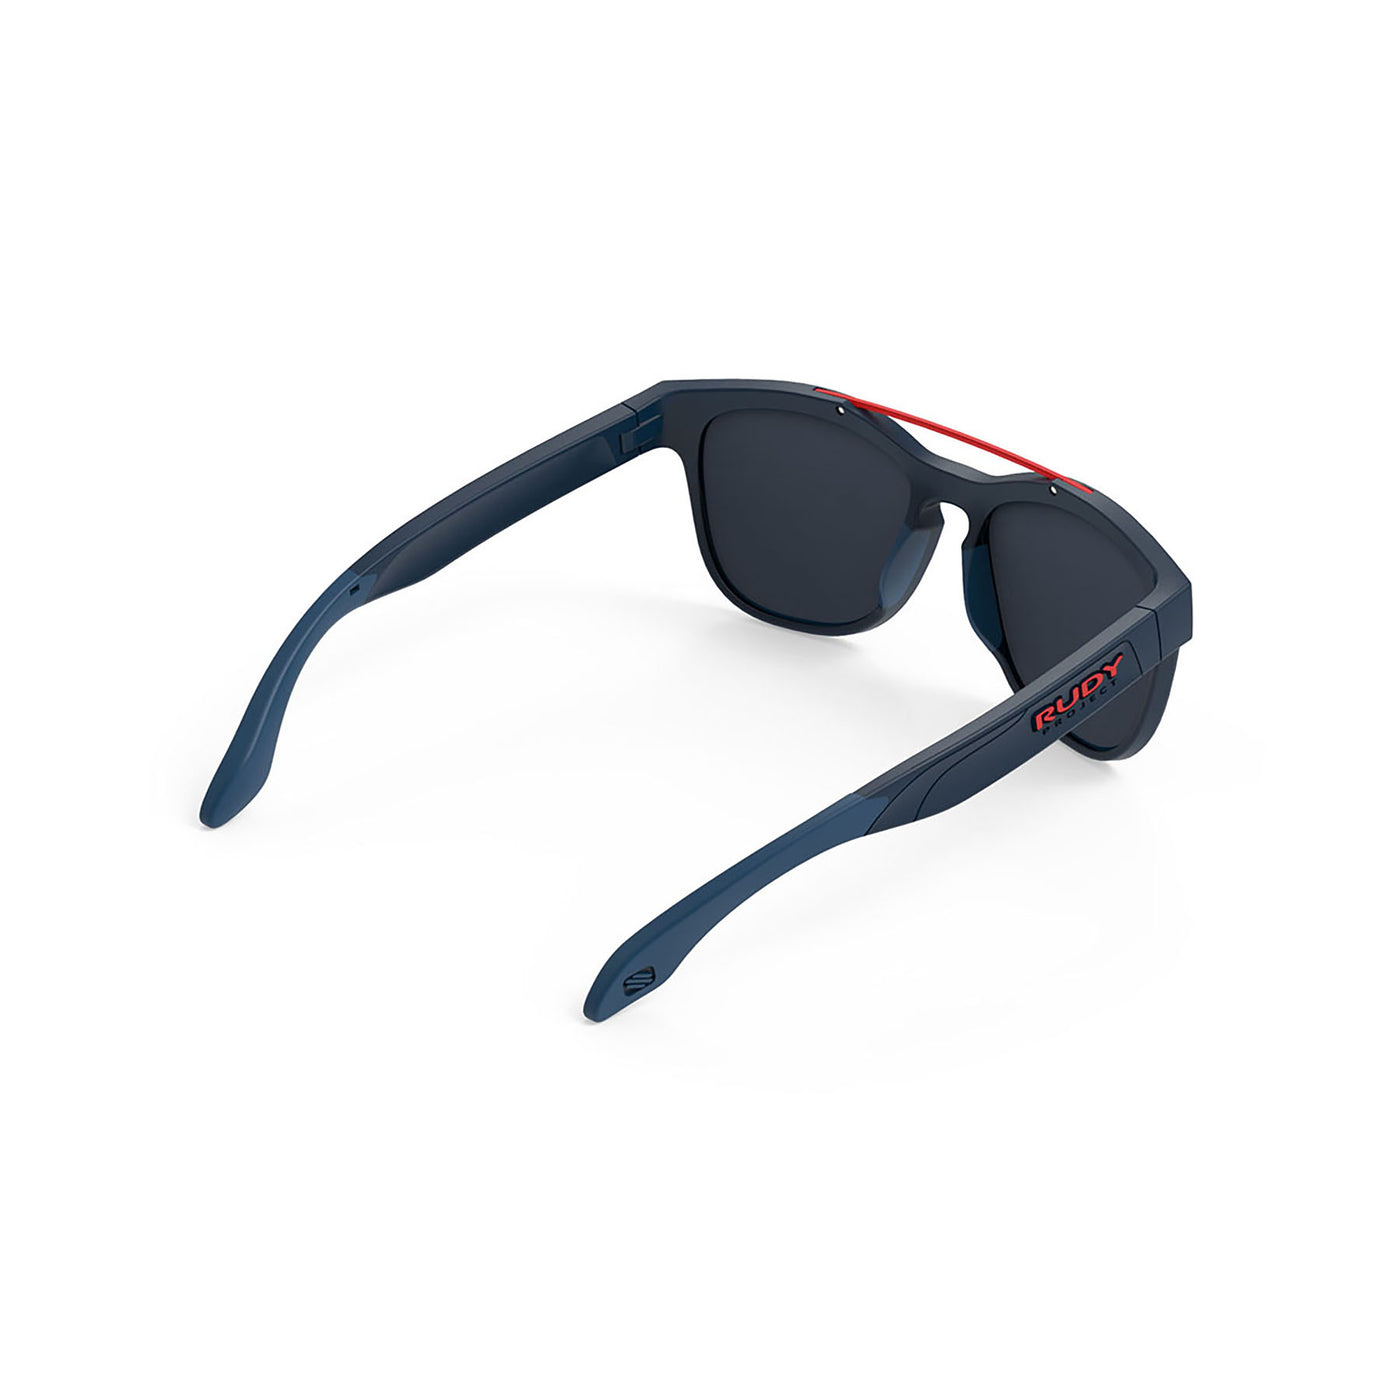 Rudy Project Spinair 59 active lifestyle and beach prescription sunglasses#color_spinair-59-navy-blue-matte-frame-and-multilaser-red-lenses